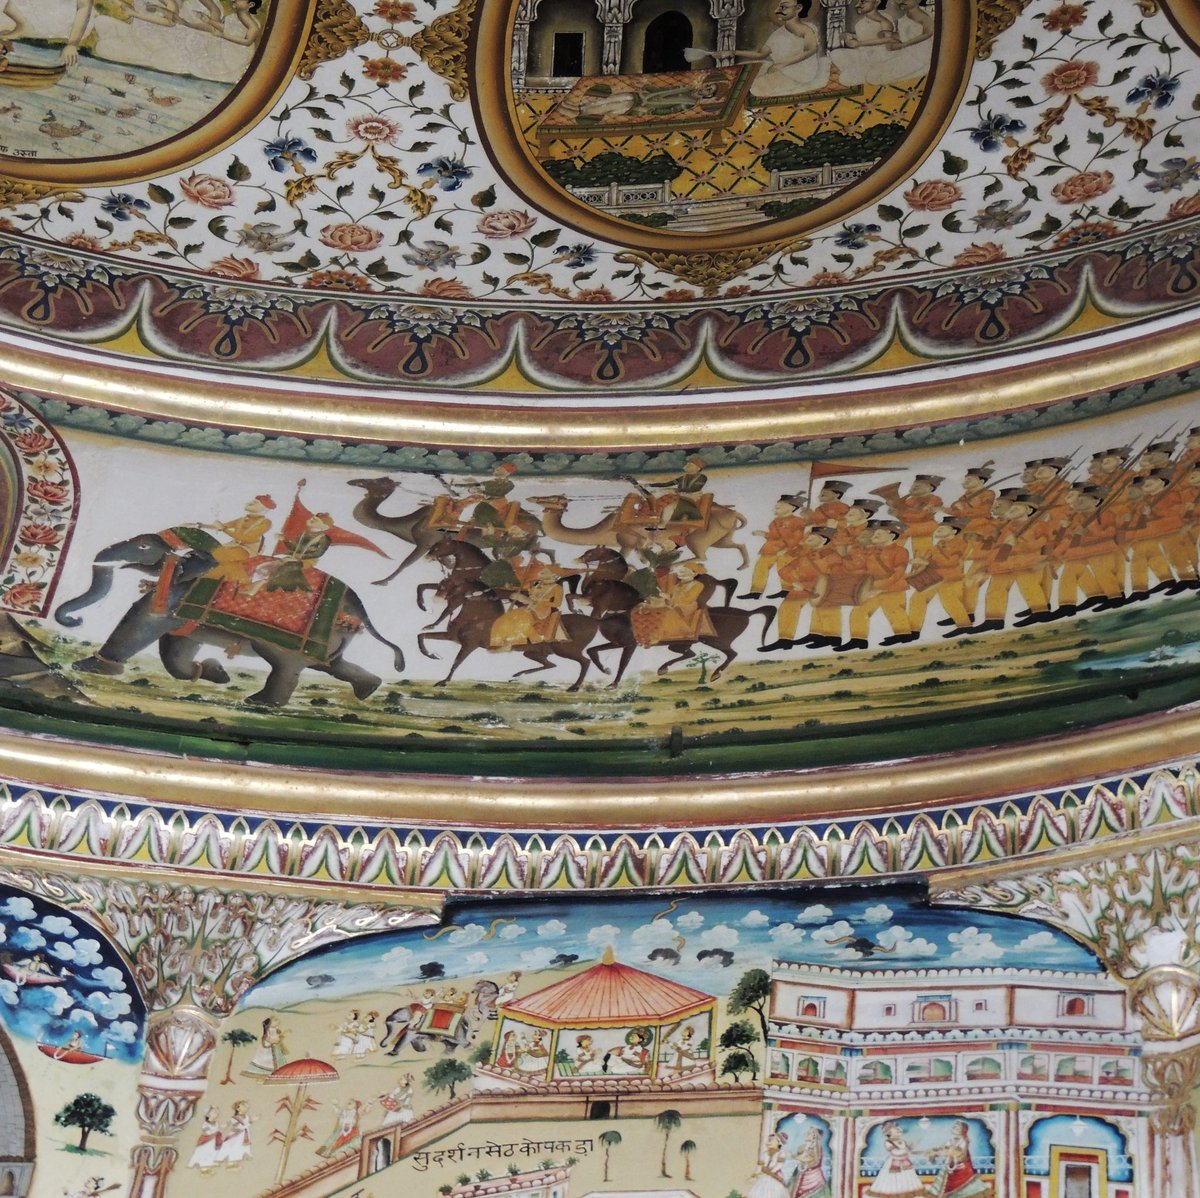 ऊ is for ऊंंट. Pic 4 is from the Bhandasar Jain temple in Bikaner, showing camels as part of an army procession.  #AksharArt  #ArtByTheLetter